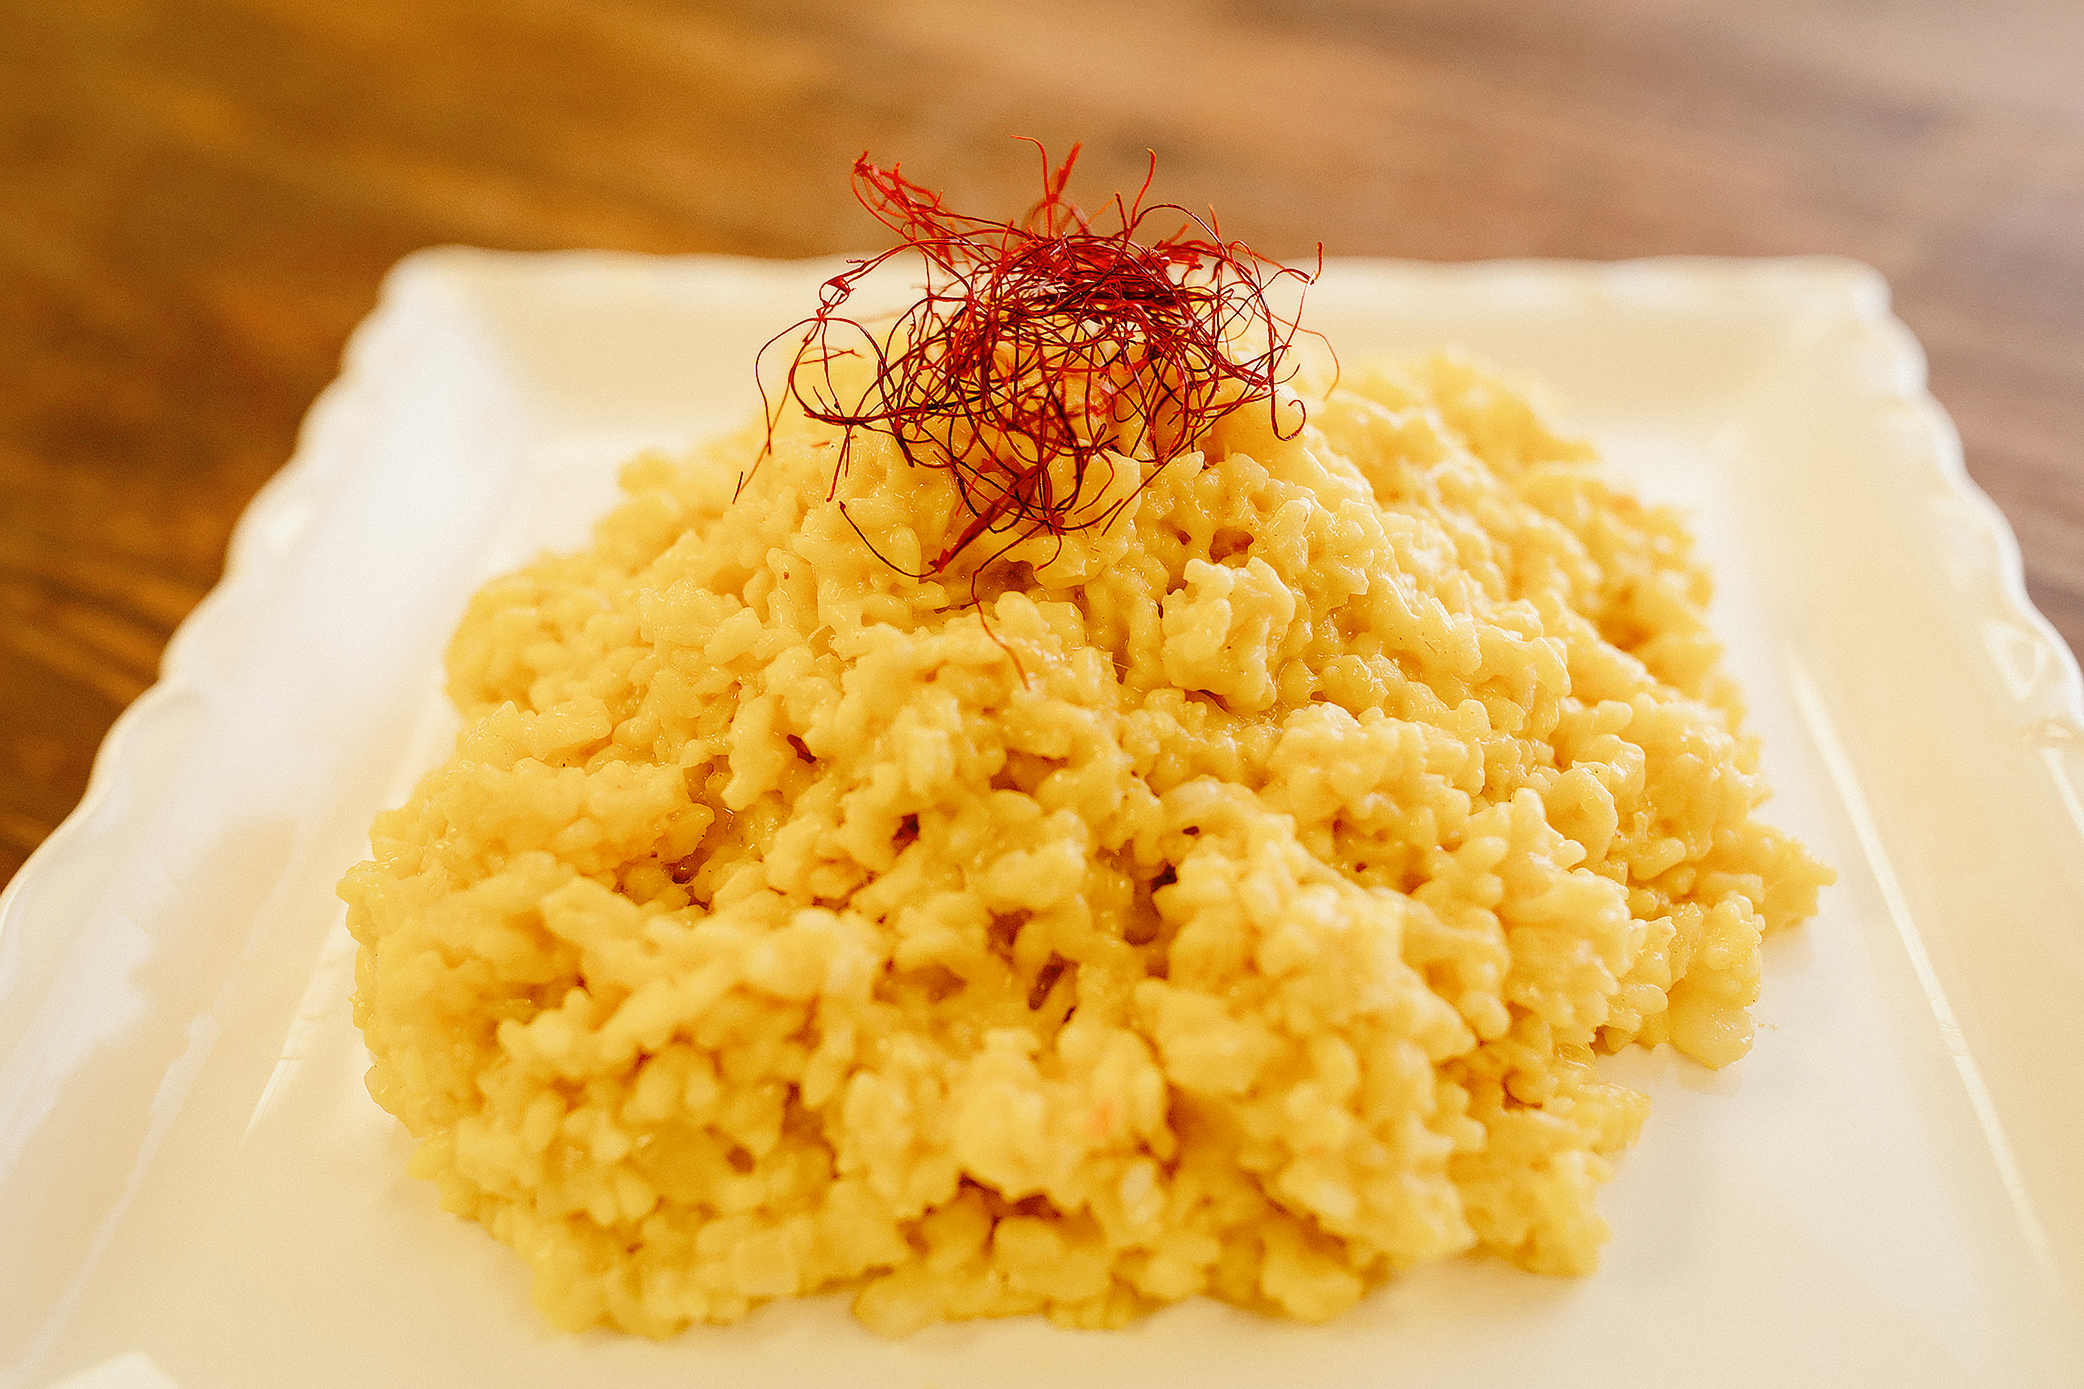 risotto milanese prepared by APM professional chefs. Find it in multiple varieties.